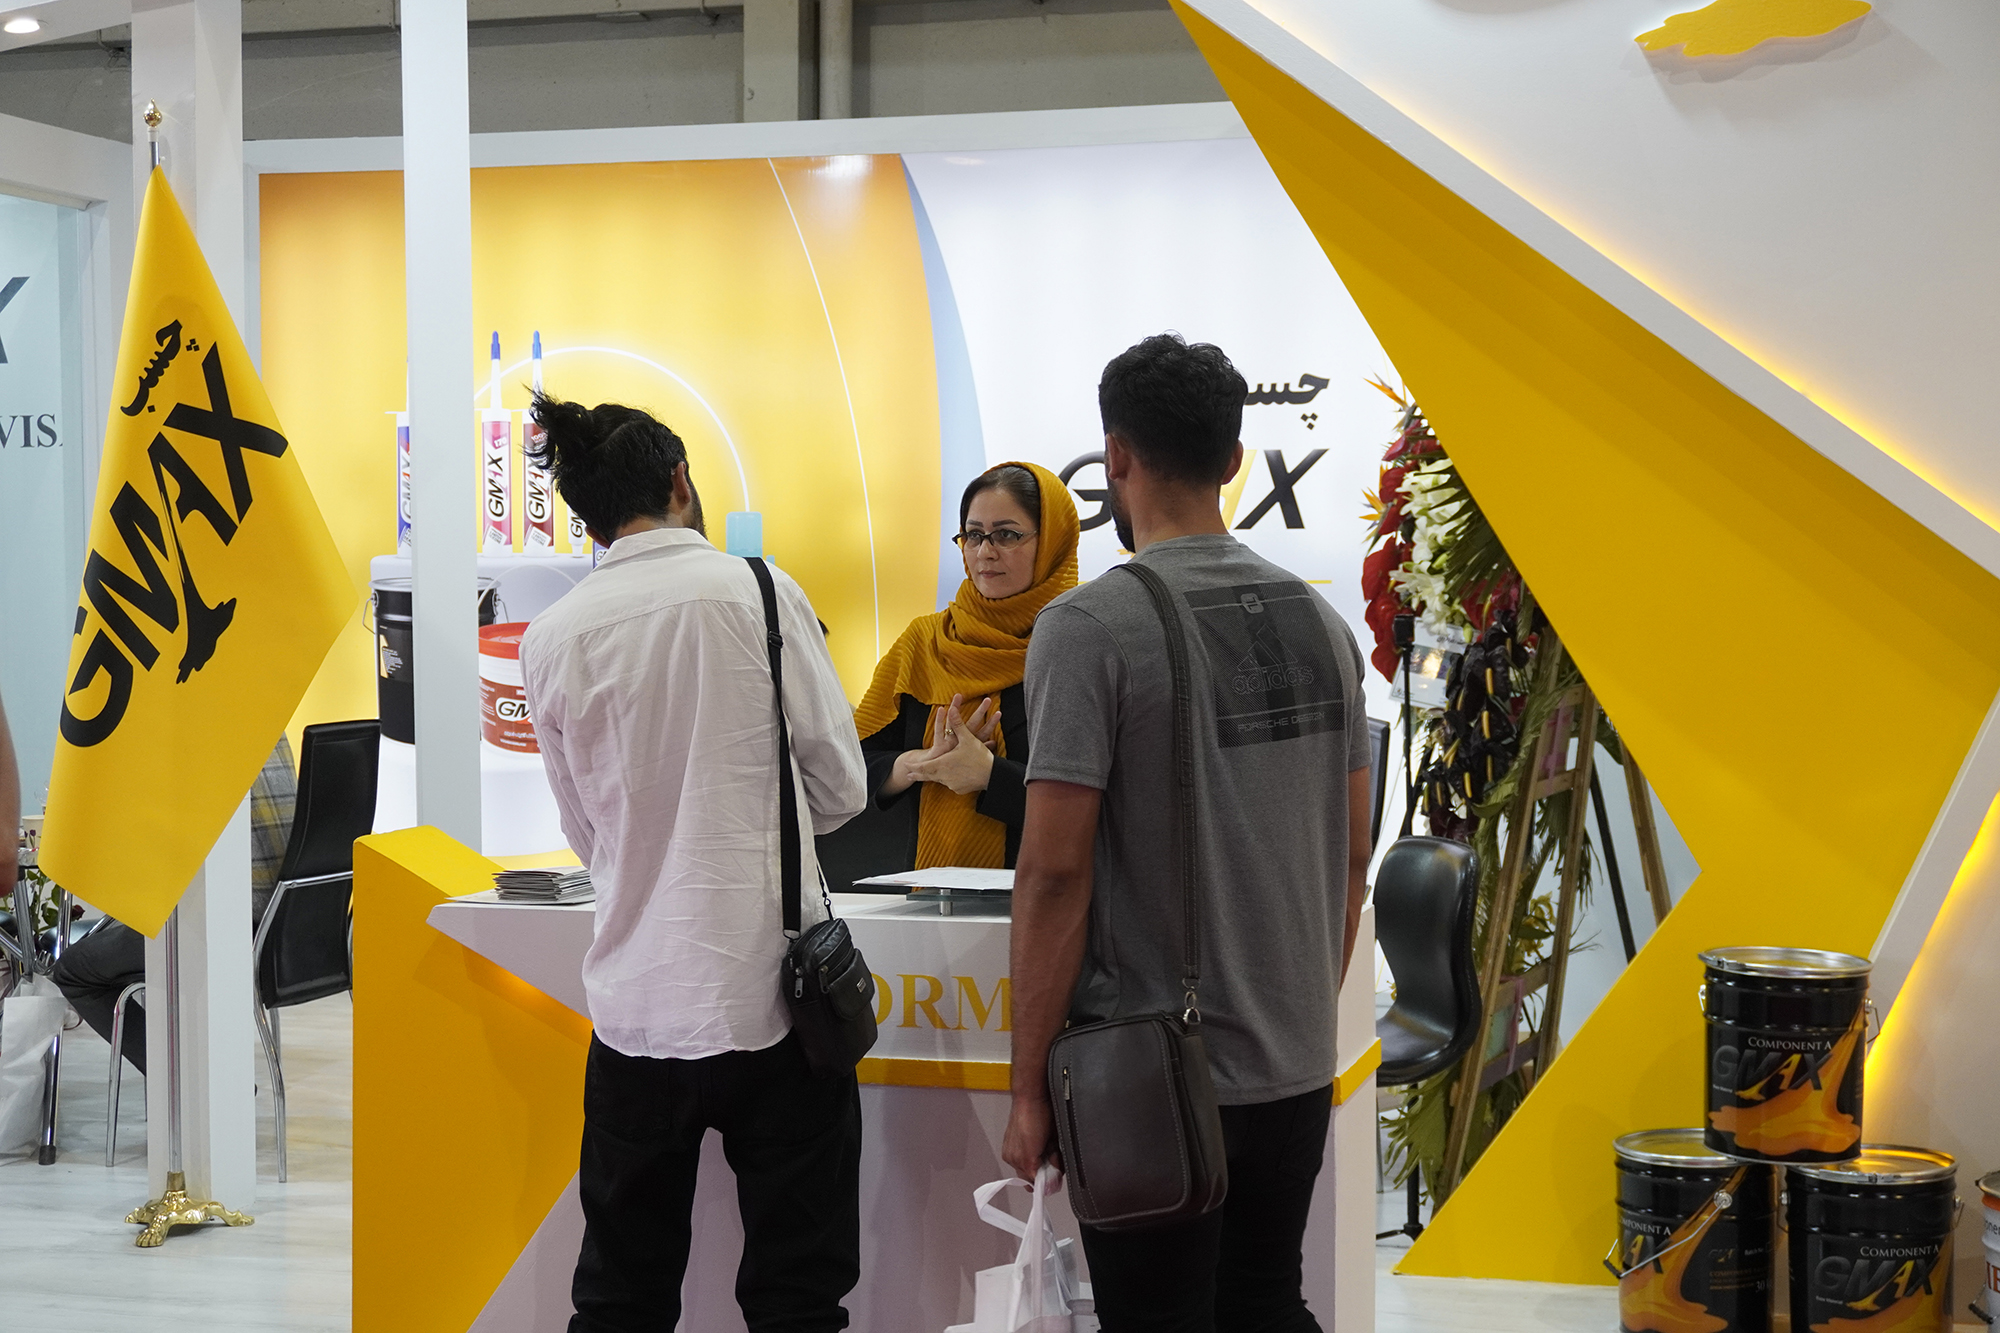 The presence of GMAX adhesive in the 14th international exhibition of doors, windows and related industries 